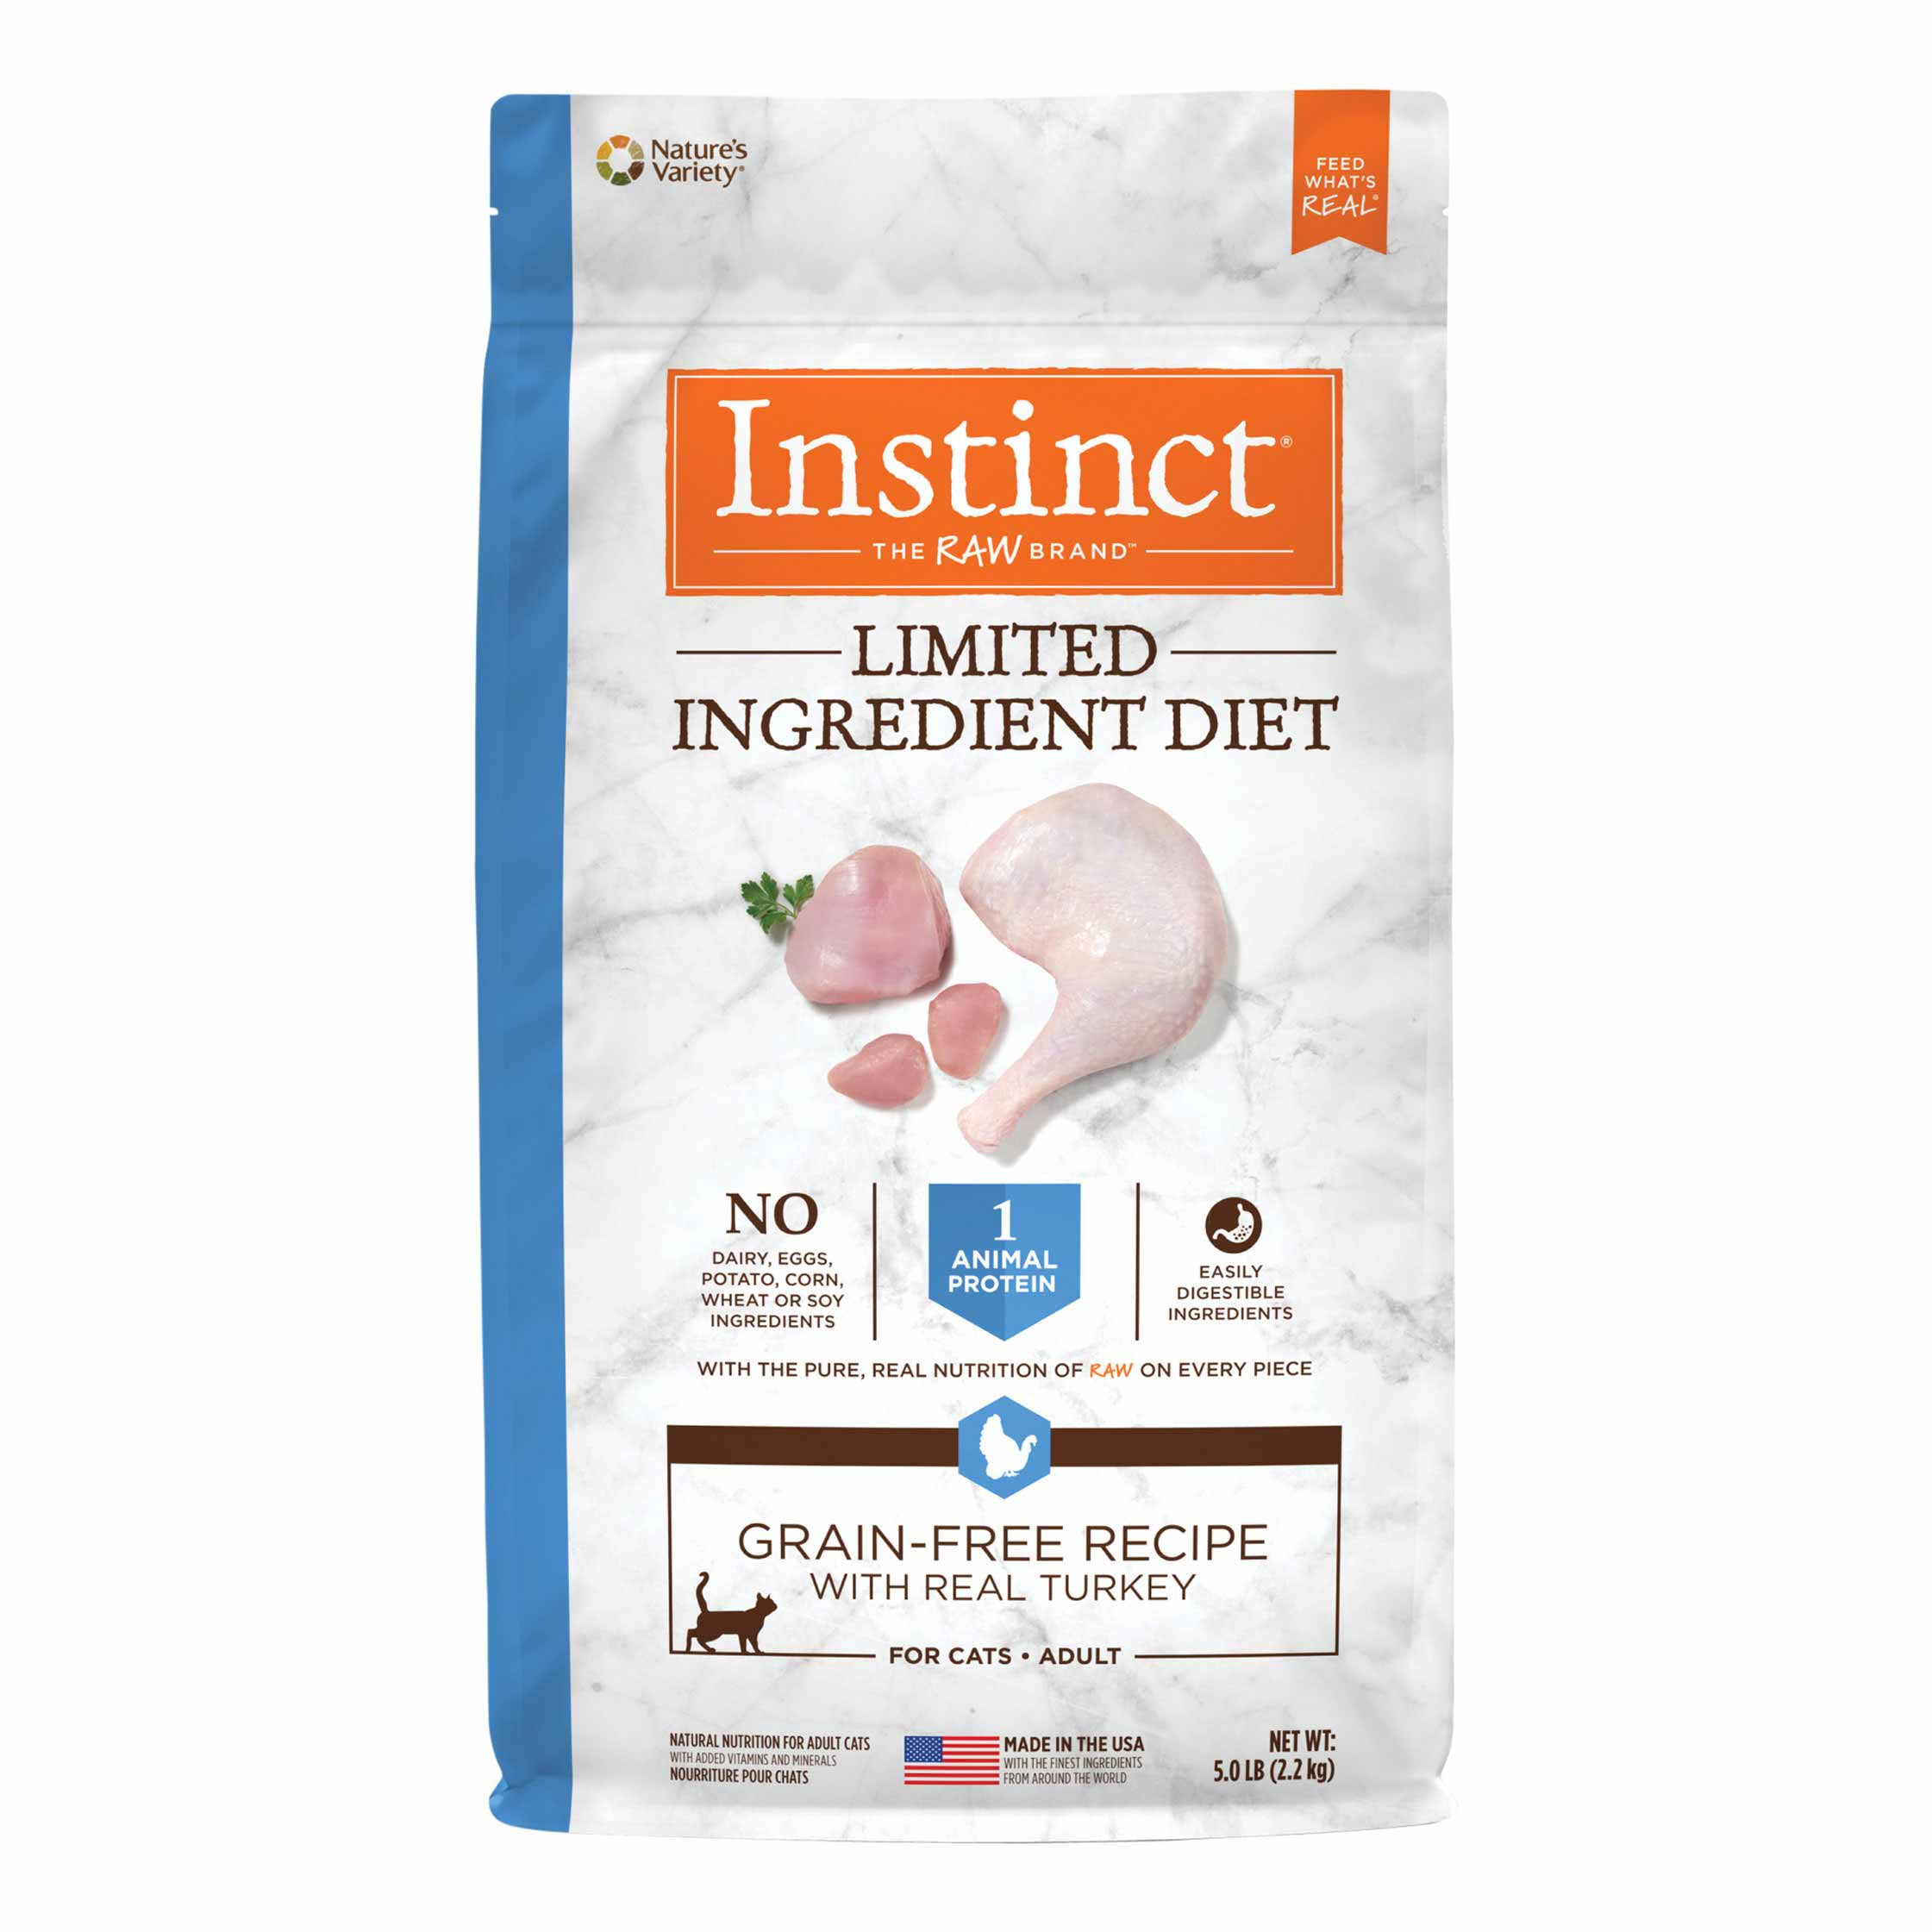 Instinct by Nature's Variety Limited Ingredient Diet Grain-Free Recipe with Real Turkey Dry Cat Food, 5-lb